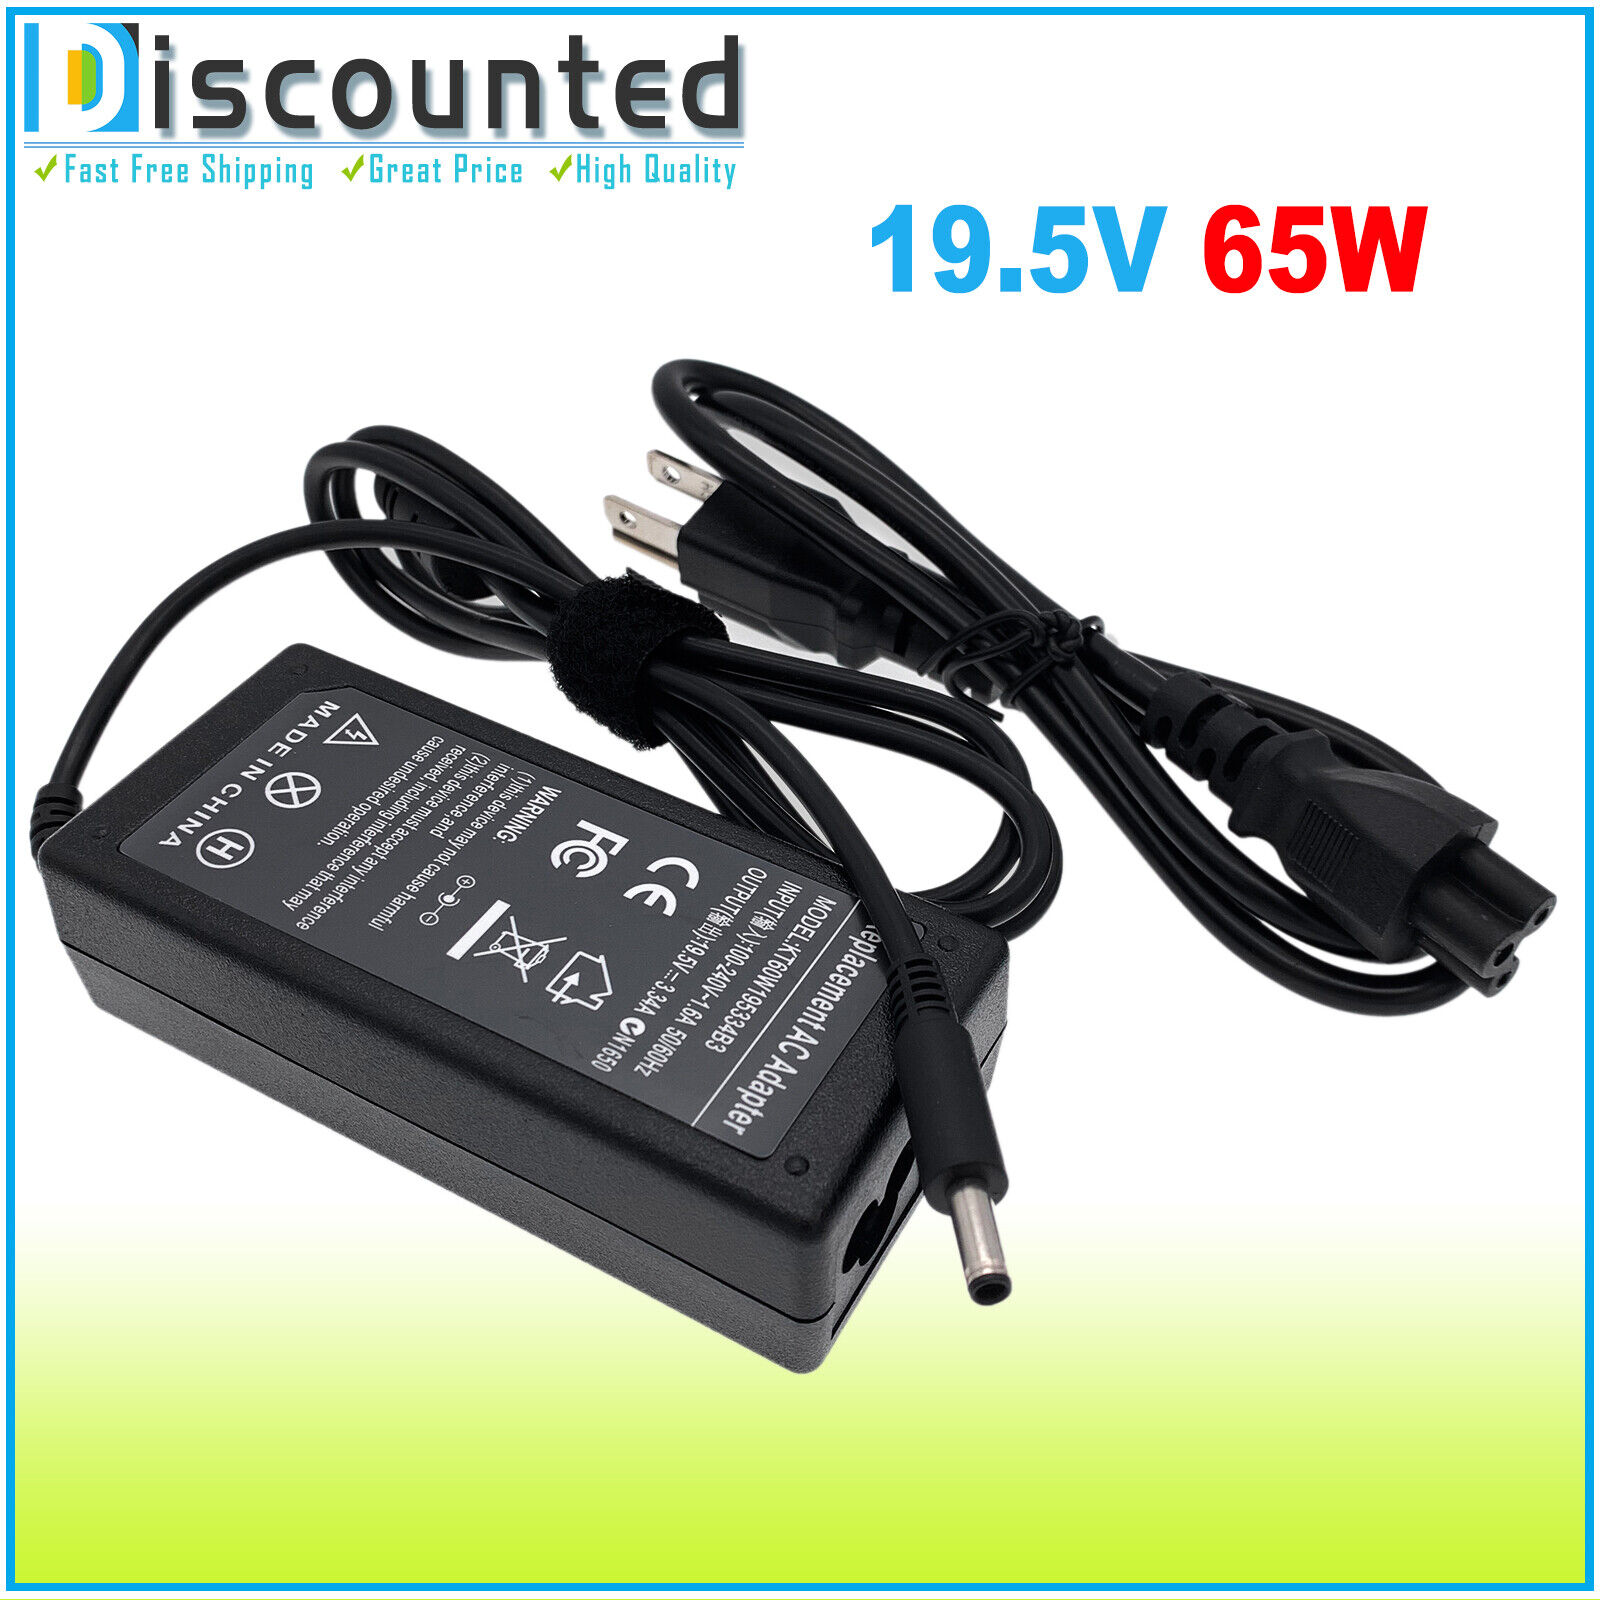 65W AC Power Adapter Charger for Dell Inspiron 15 5509 5508 5502 5501 Laptop